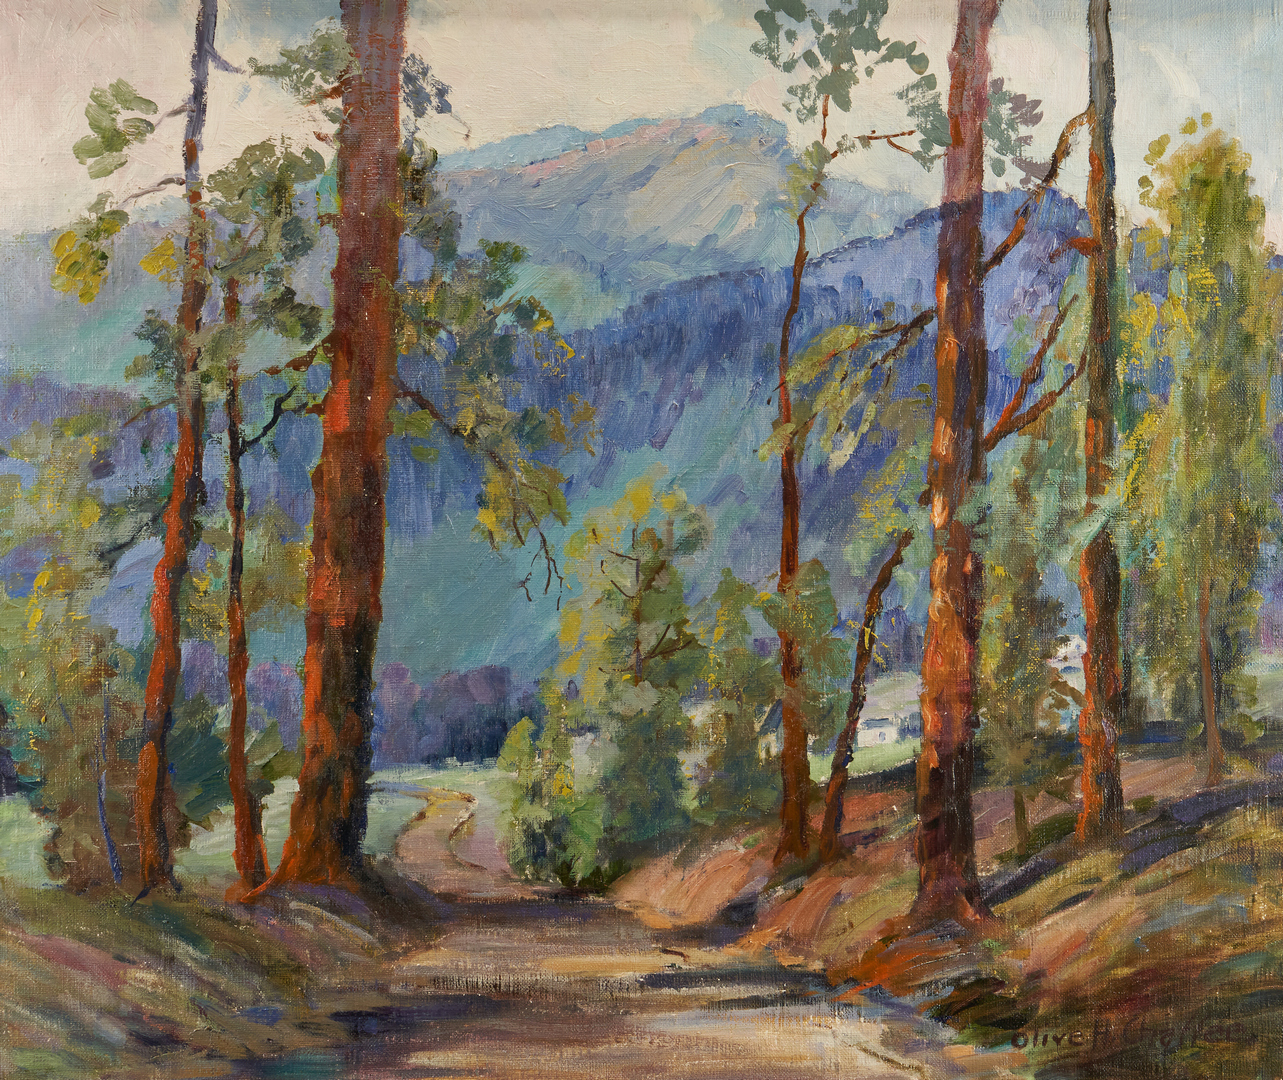 Lot 365: Olive Chaffee O/C Painting, Mountain Landscape